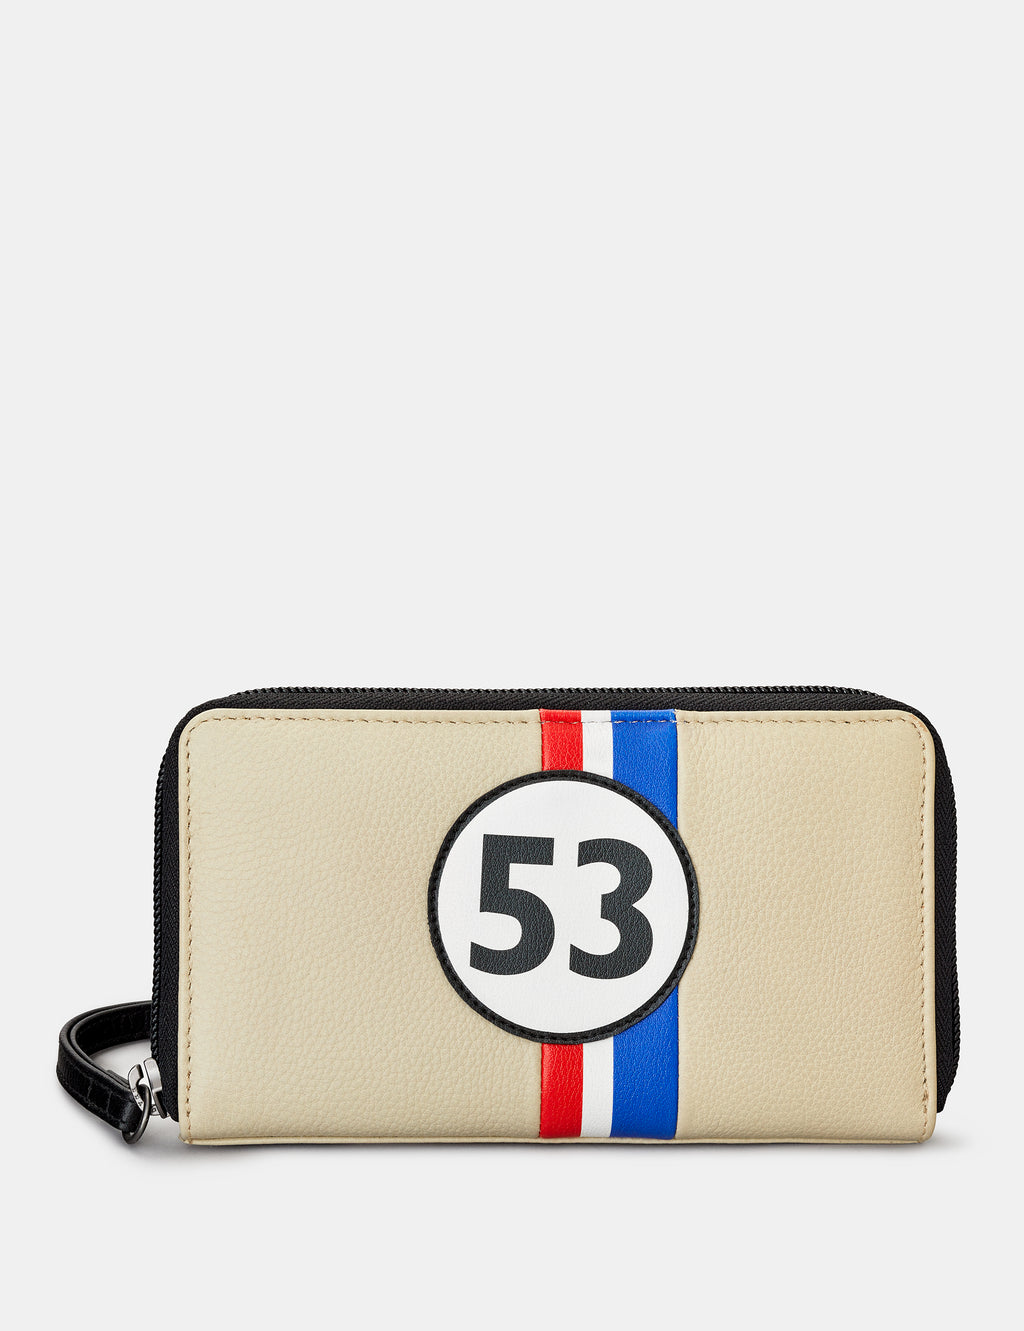 Car Liveries No. 53 Zip Round Leather Purse With Strap